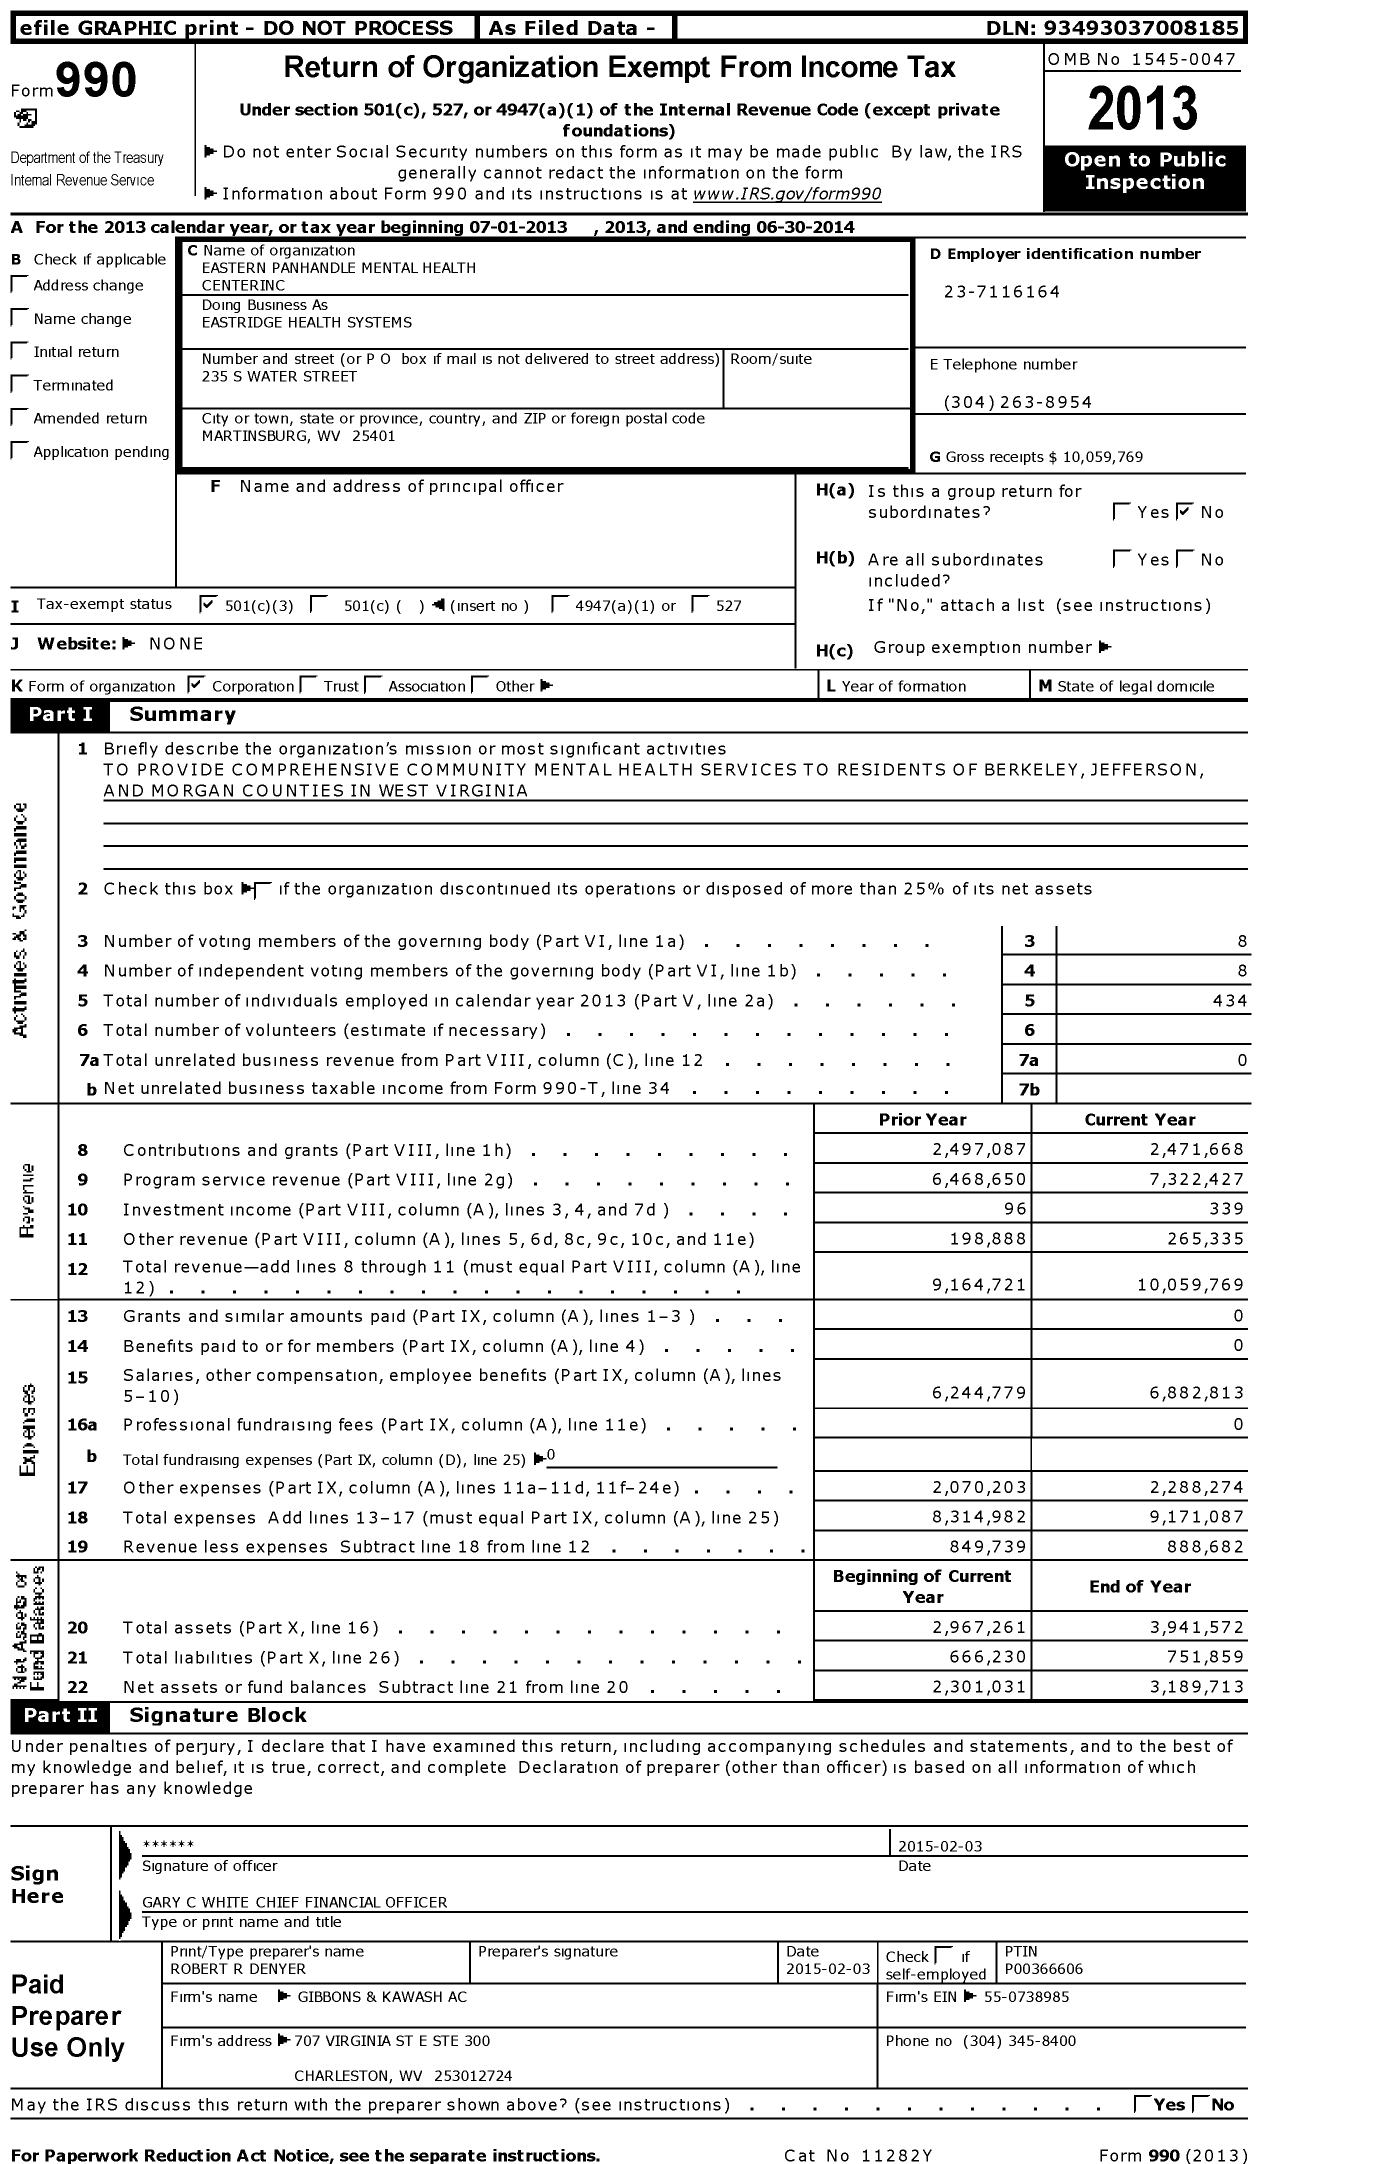 Image of first page of 2013 Form 990 for Eastridge Health Systems